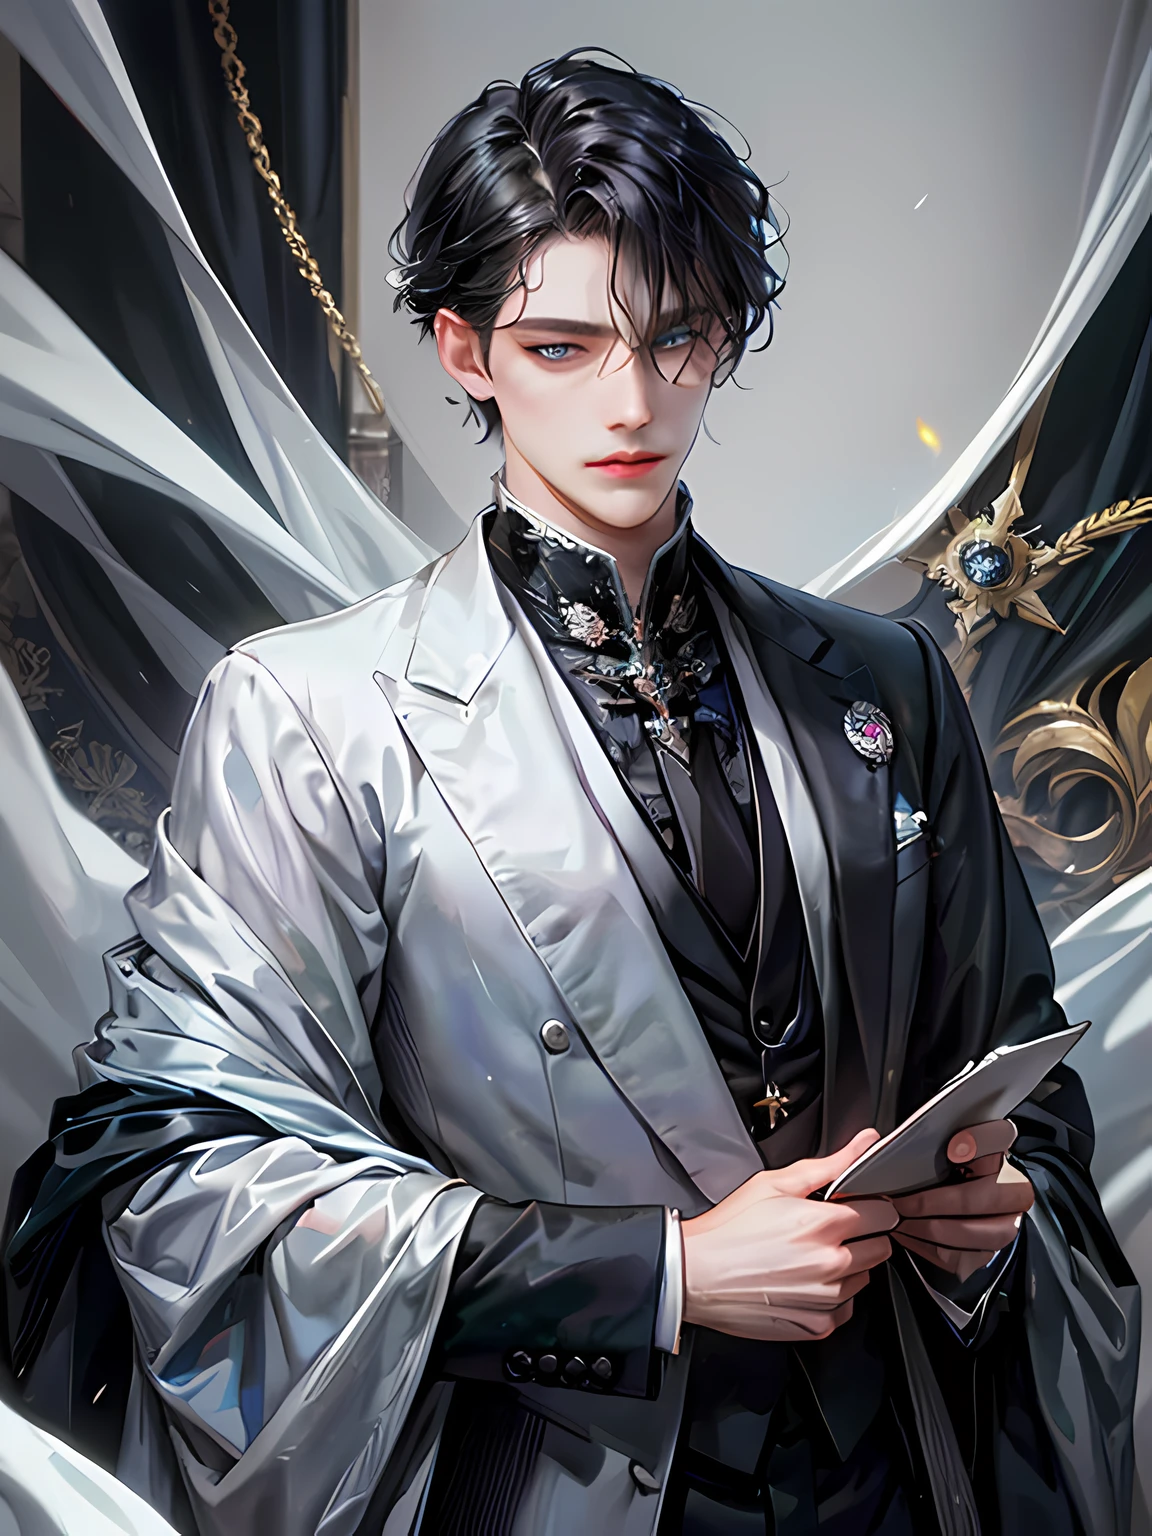 8K masterpiece superlative, illuminated by a mix of photorealism and anime aesthetics, a stunning (close-up) of a man in a black white gold suit and tie, beautiful androgynous prince, delicate androgynous prince, handsome prince, ((wearing aristocrat clothes)), he has dark black hairs, bangs parted either on the side or at the center, best done in a 3:7 ratio hairstyle, blue eyes, cold look, sharp eyes, stern face, aristocratic appearance, handsome male vampire, royal elegant pose, johan liebert mixed with alucard, korean art nouveau anime, victorian-era lanscape, victorian clothes, arisocratic clothes.